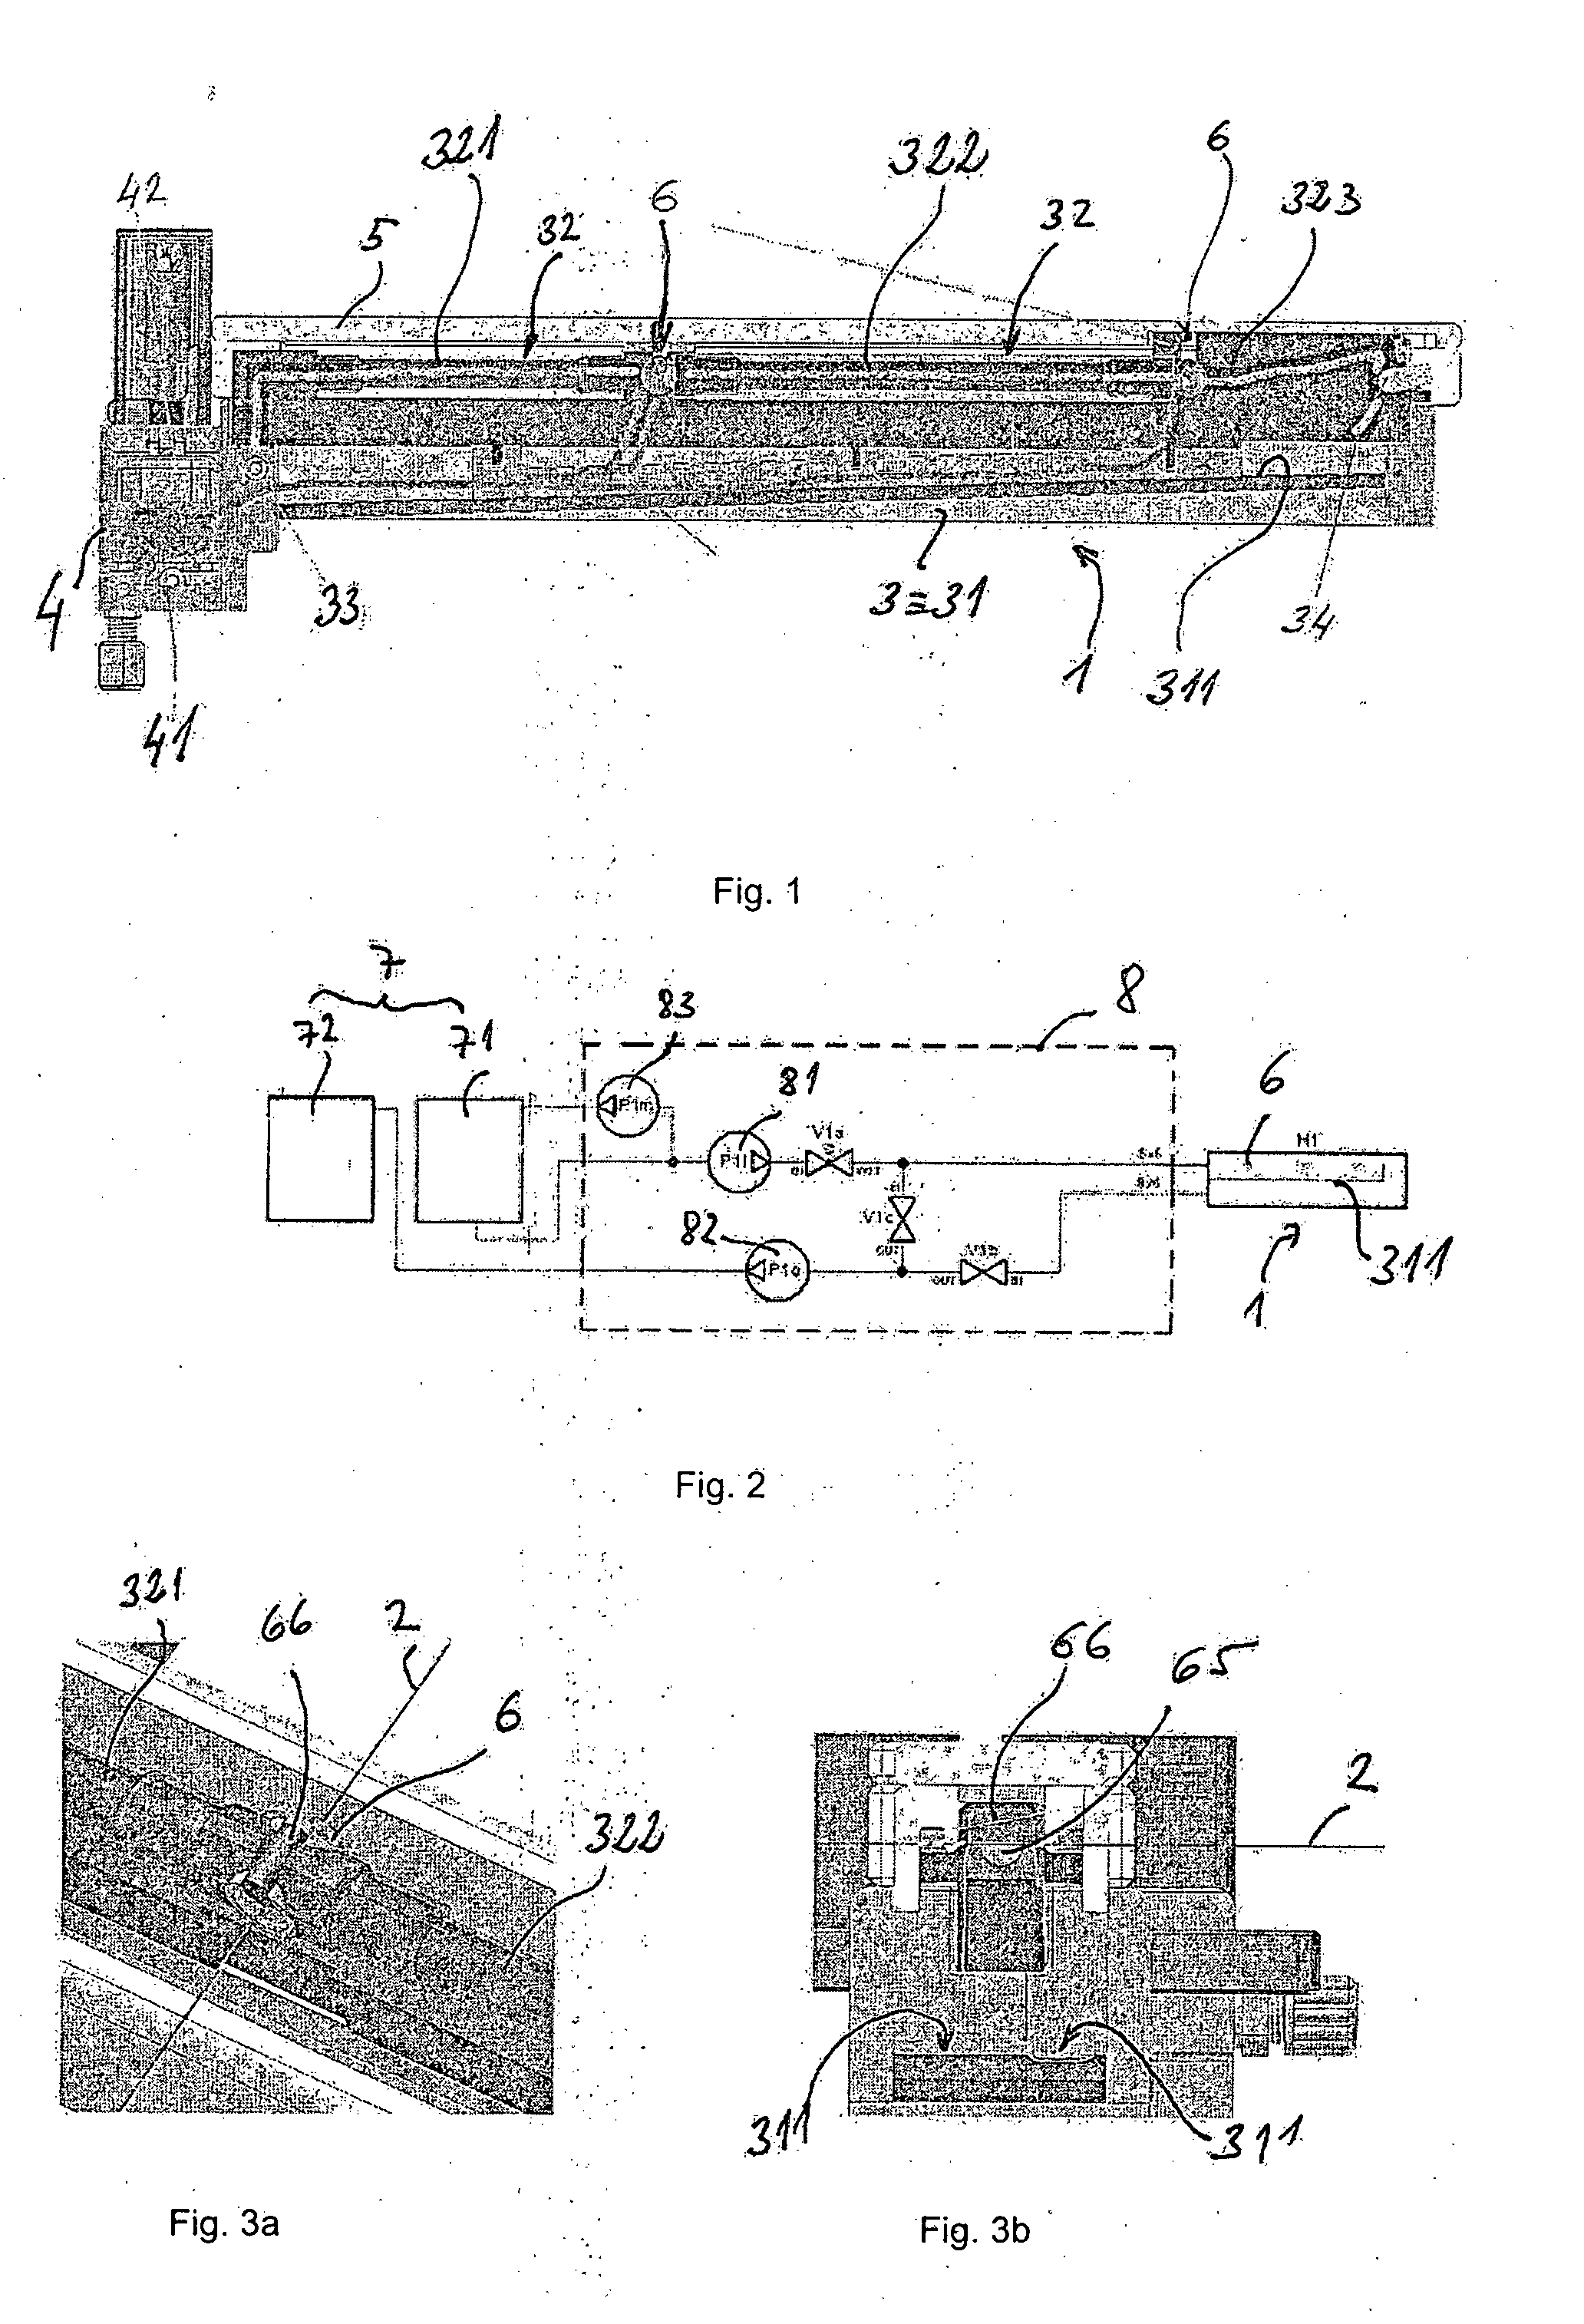 Method and device for application of liquid polymeric material onto spinning cords